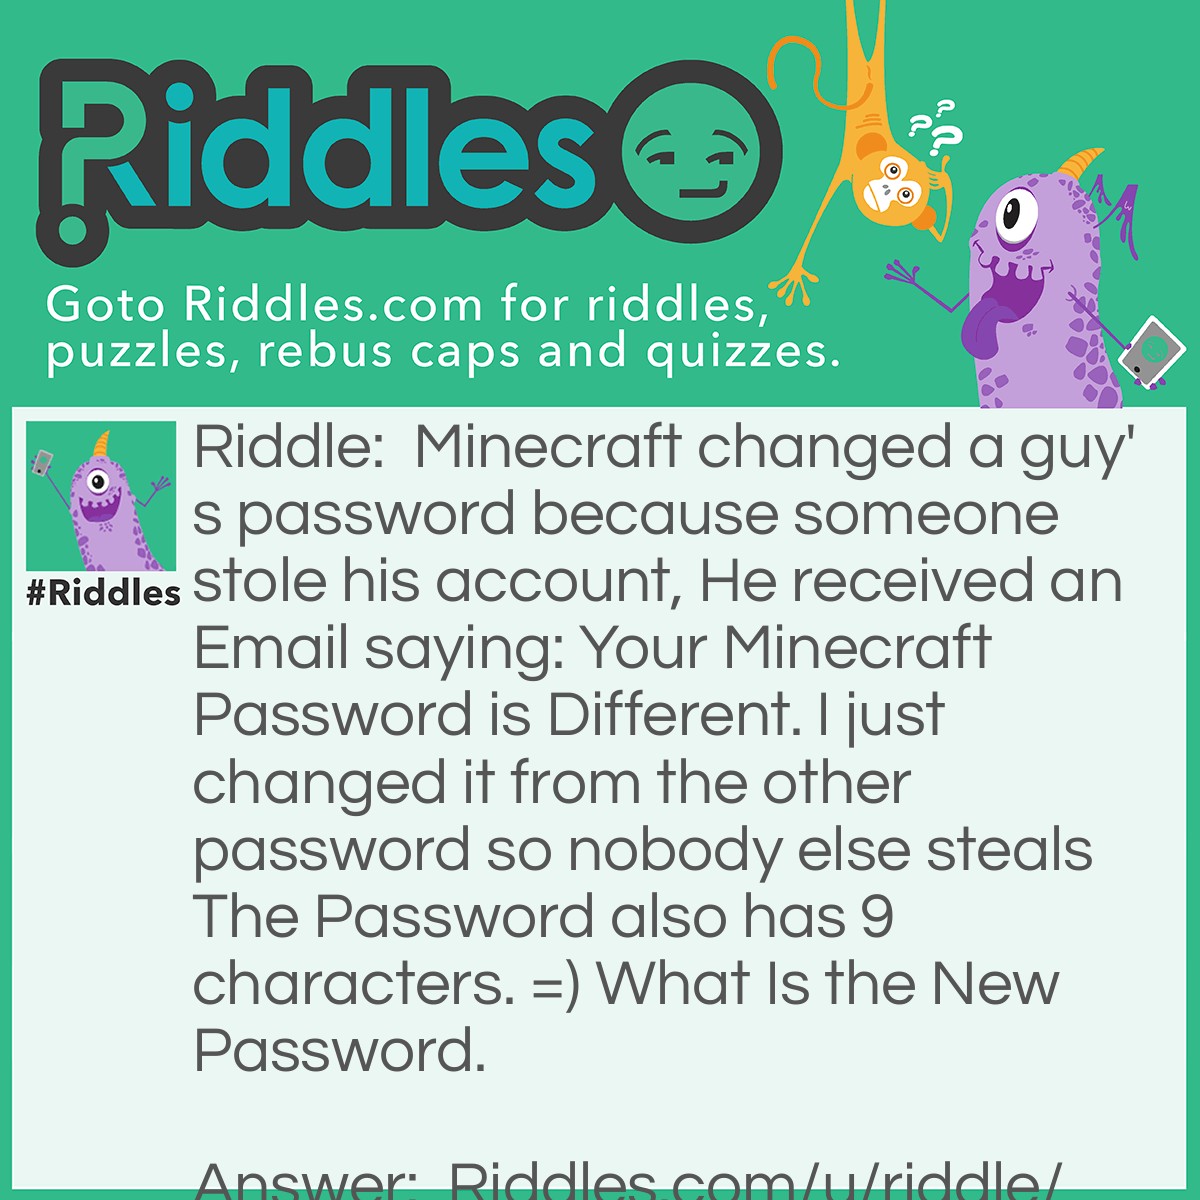 Riddle: Minecraft changed a guy's password because someone stole his account, He received an Email saying: Your Minecraft Password is Different. I just changed it from the other password so nobody else steals The Password also has 9 characters. =) What Is the New Password. Answer: The Password is 'Different' Having the word to even have 9 Characters! D = 1 I = 2 F = 3 F = 4 E = 5 R = 6 E = 7 N = 8 T = 9